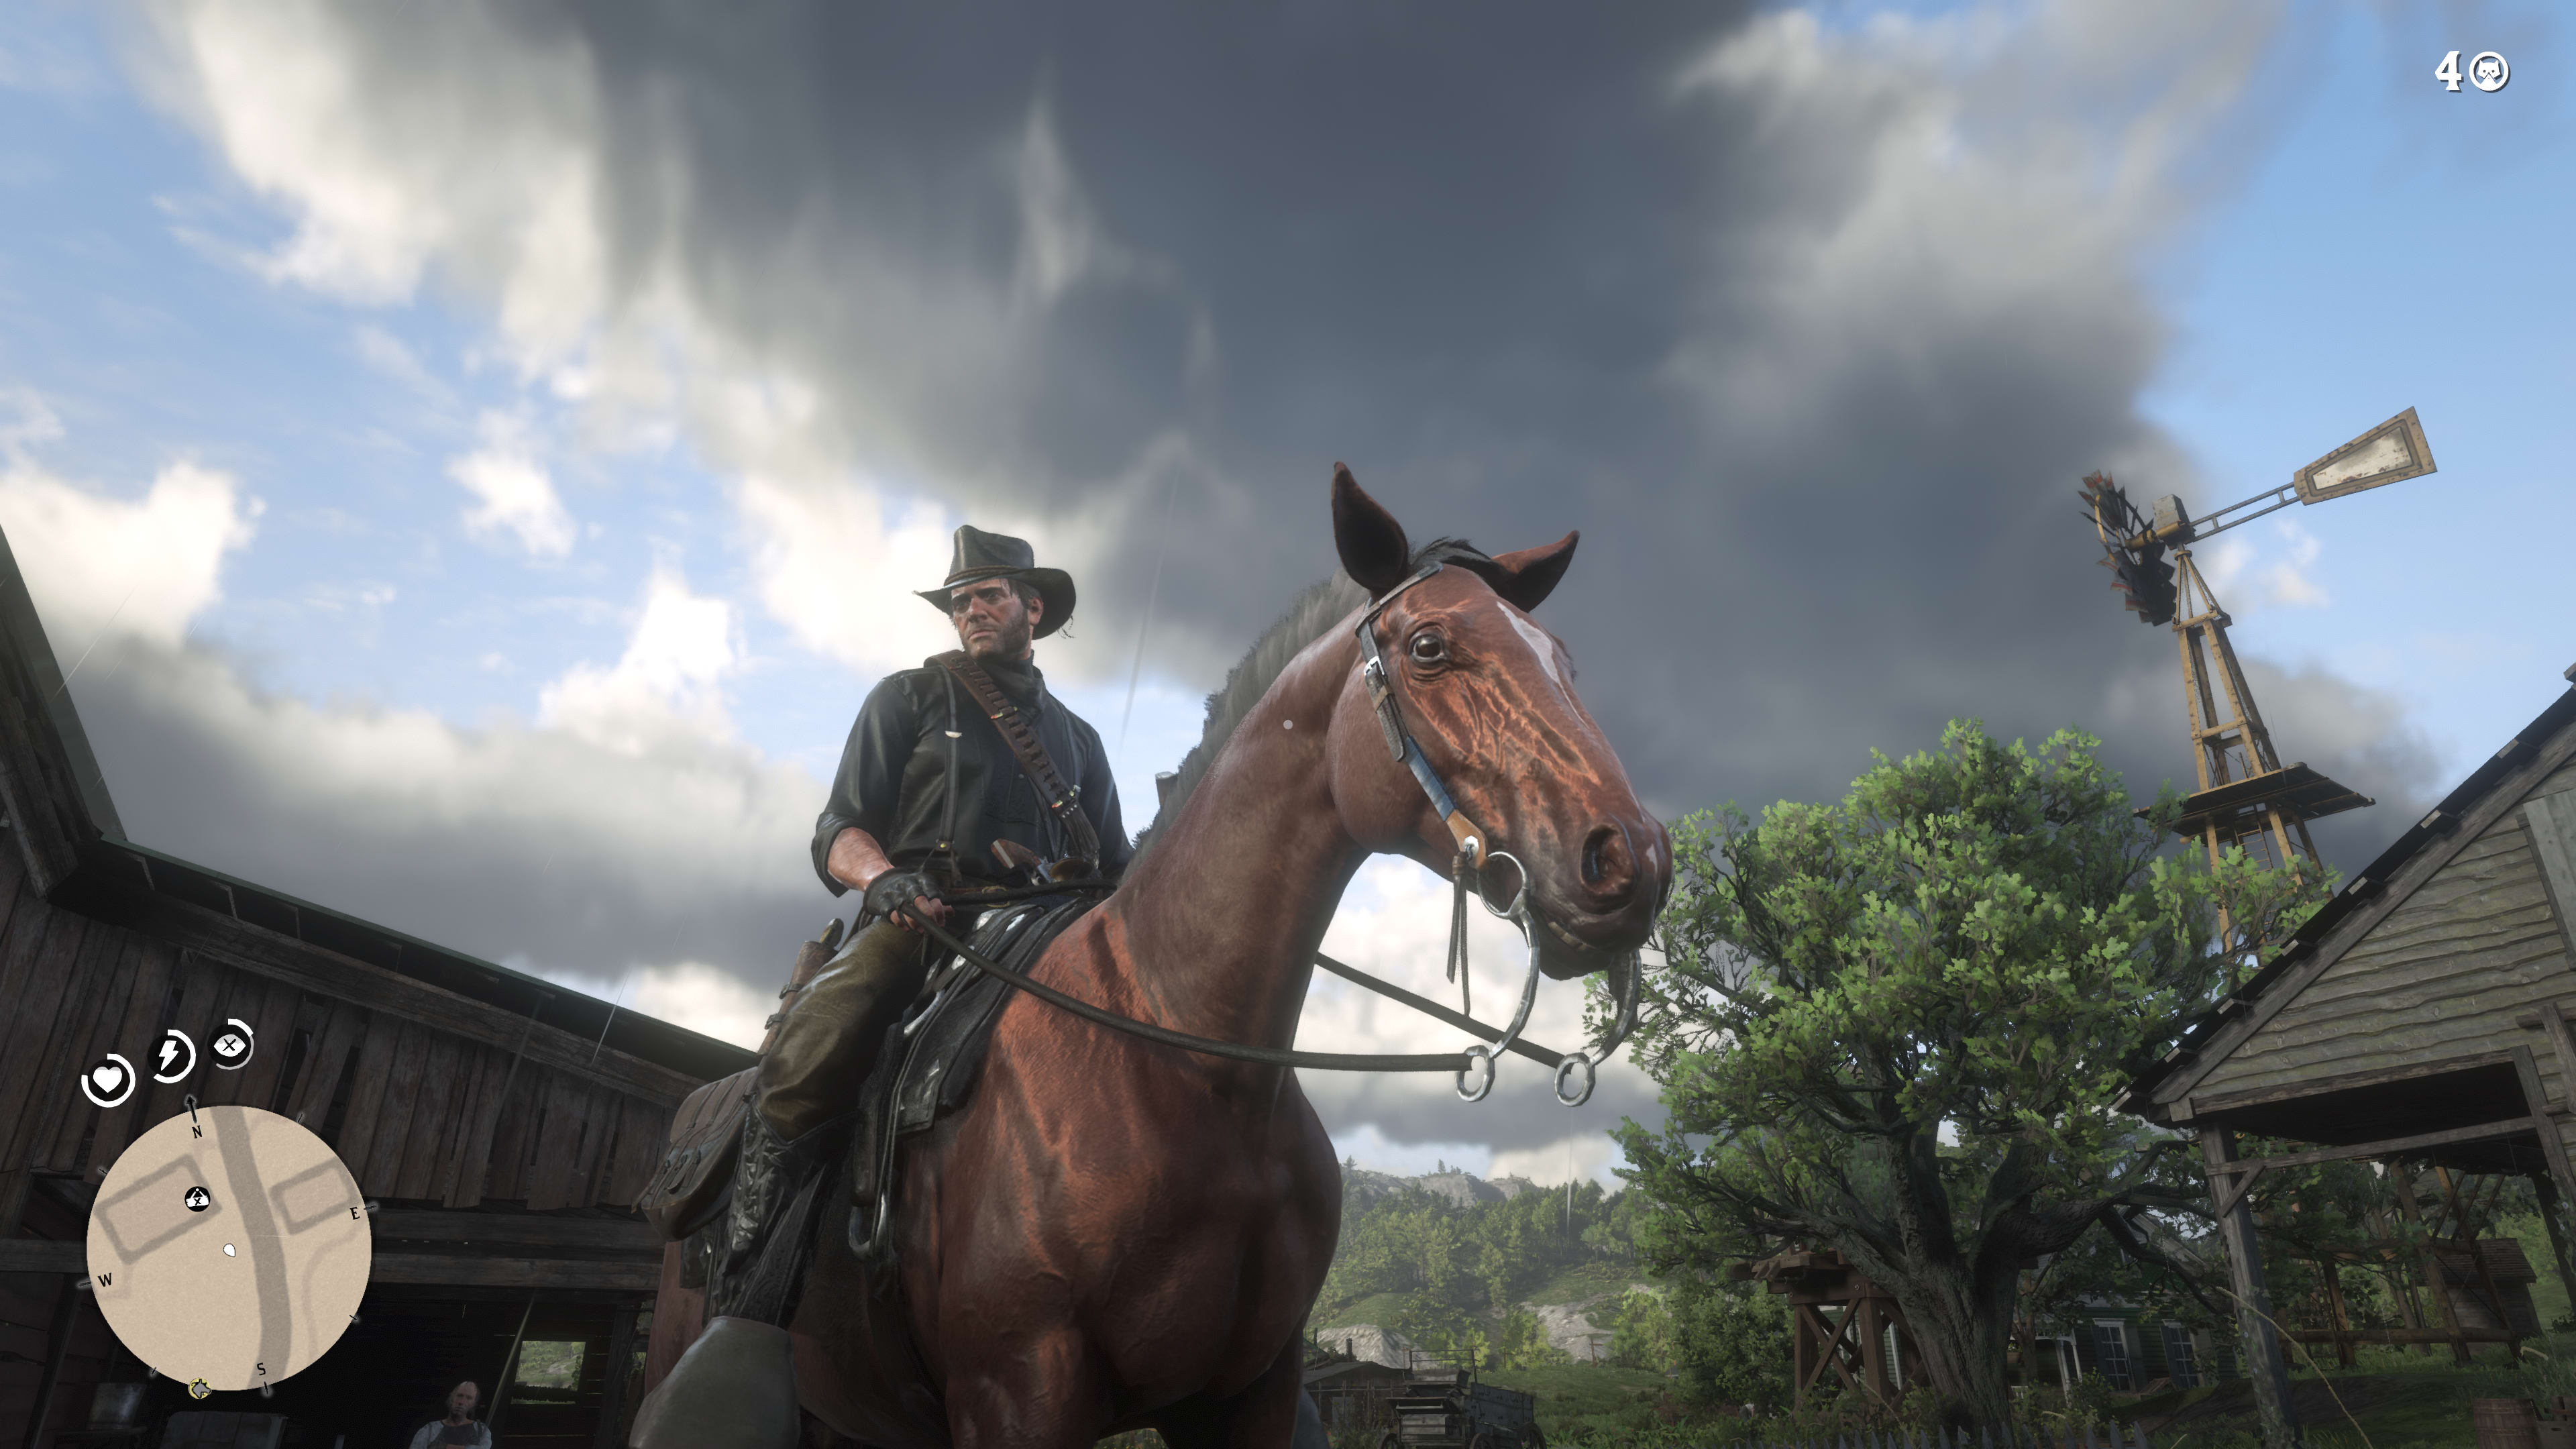 The full Red Dead Redemption 2 map shows off a big world to explore